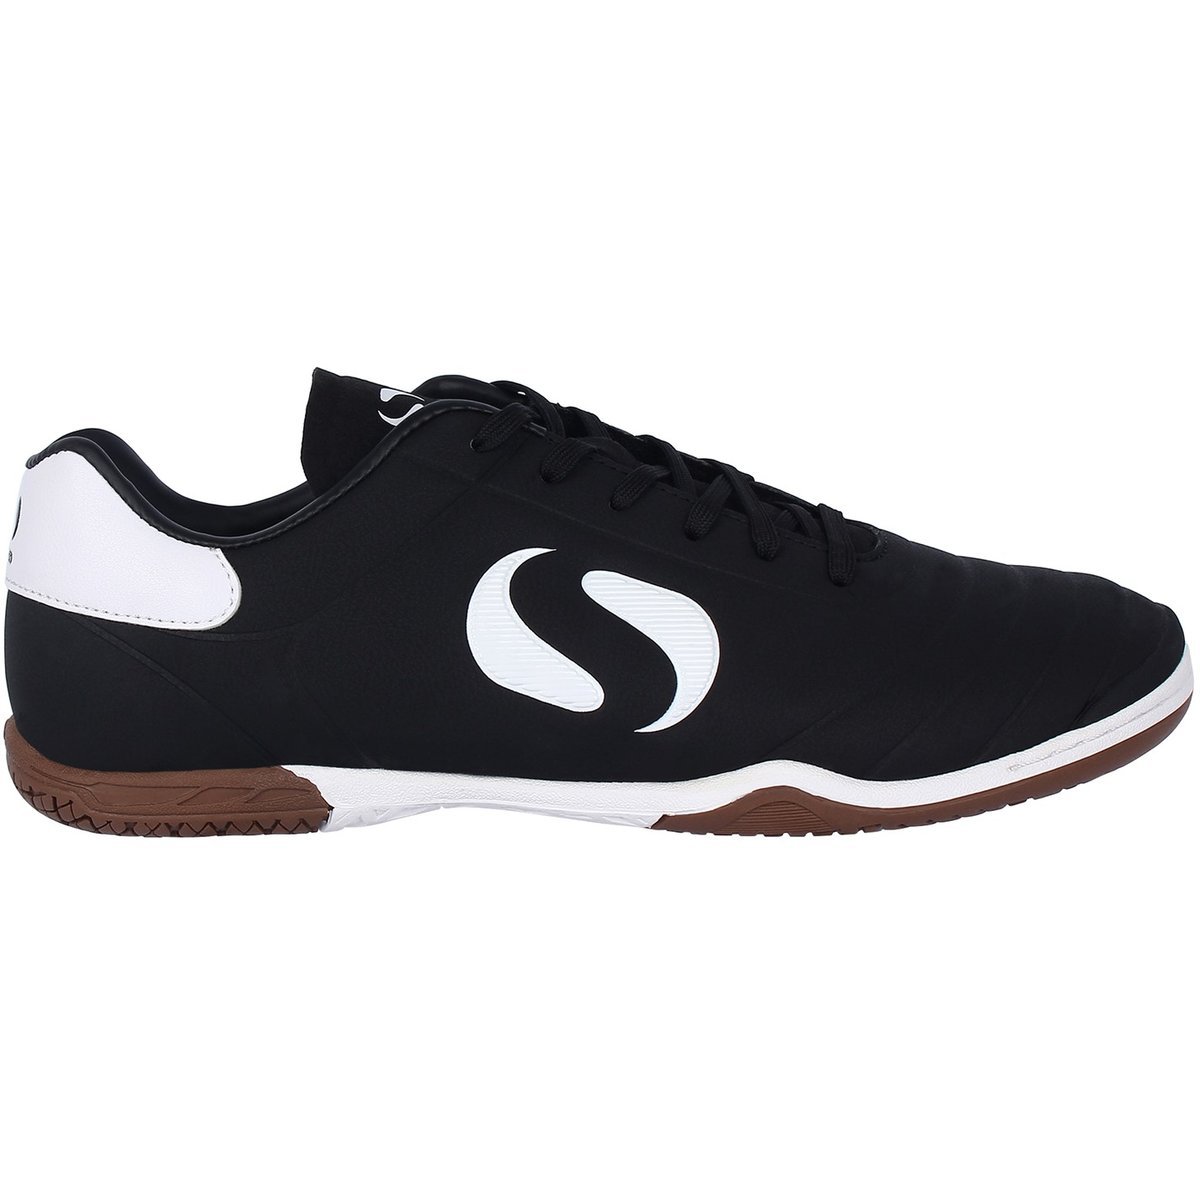 Football Trainers: Mens